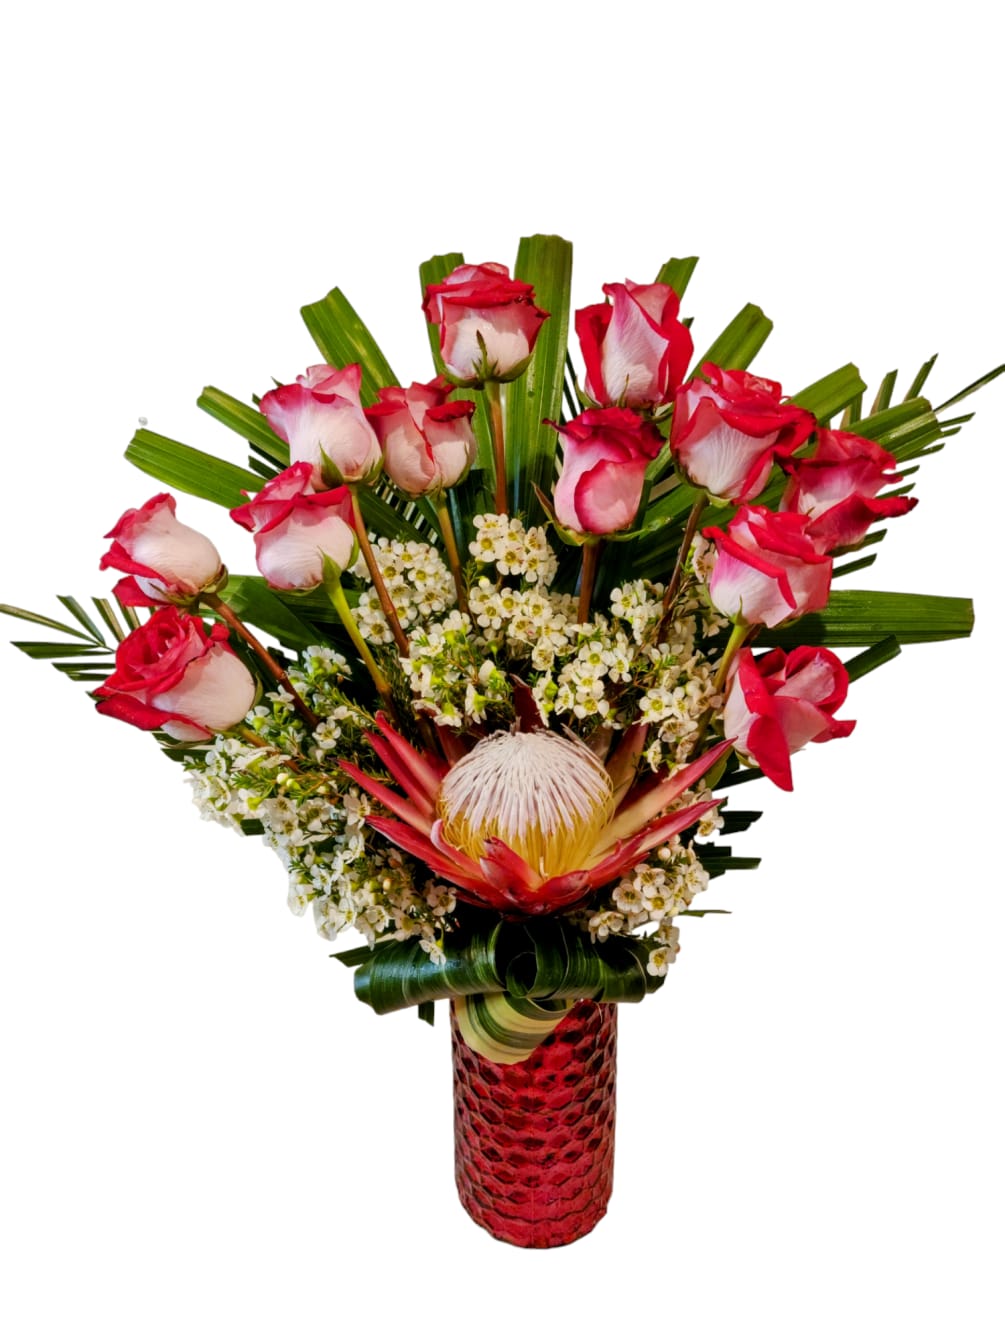 A dozen two-toned roses and wax flowers surround an exotic Red King